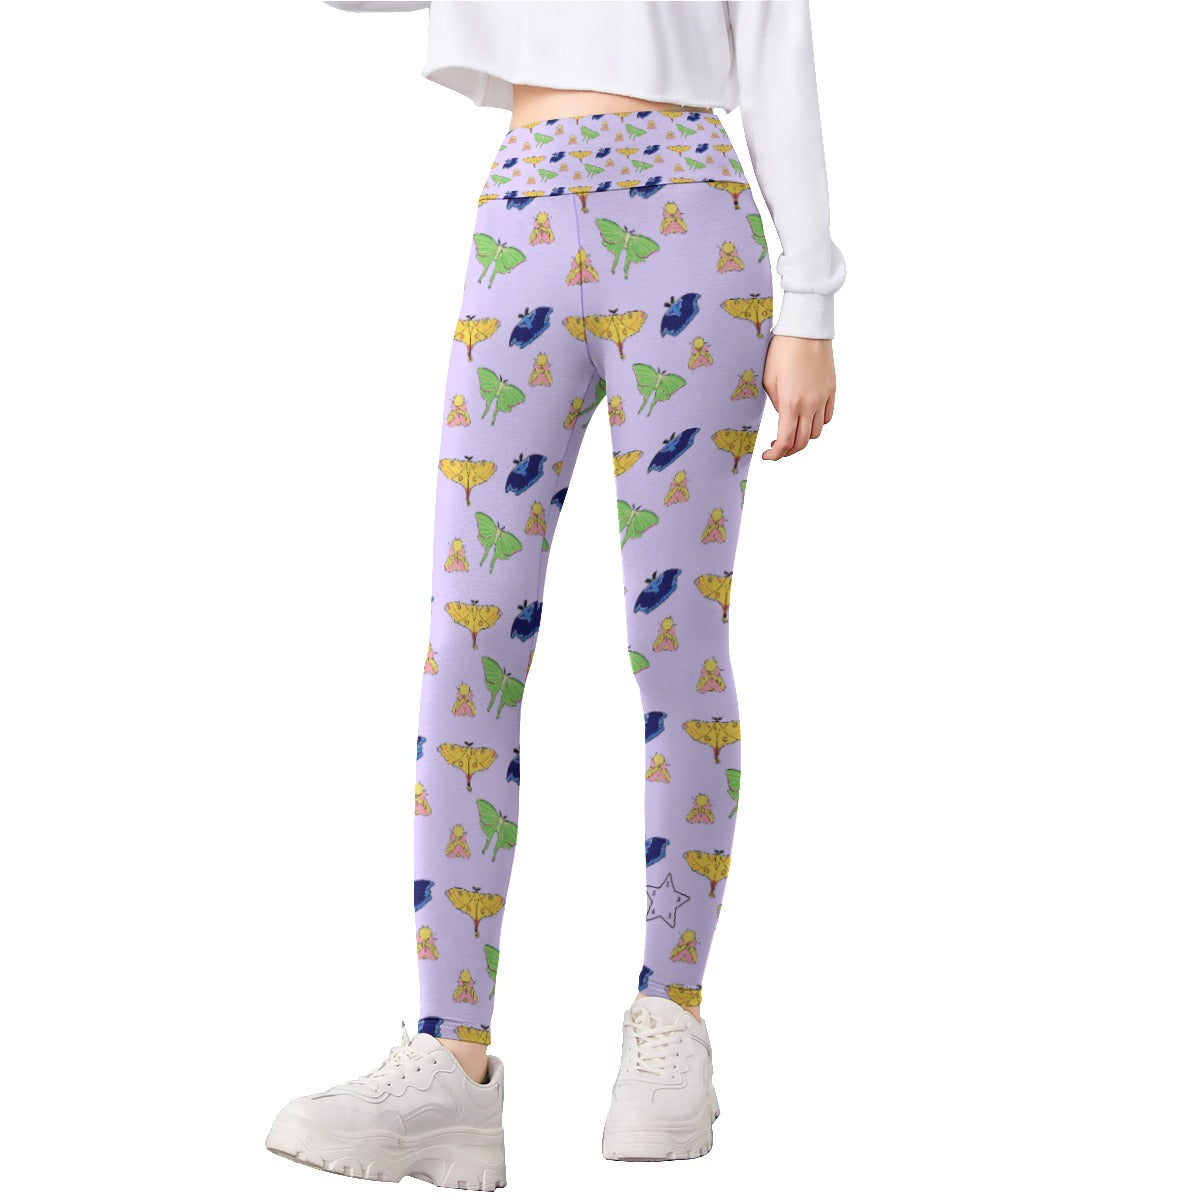 Girls Moth Leggings with Star - Clothes that Calm